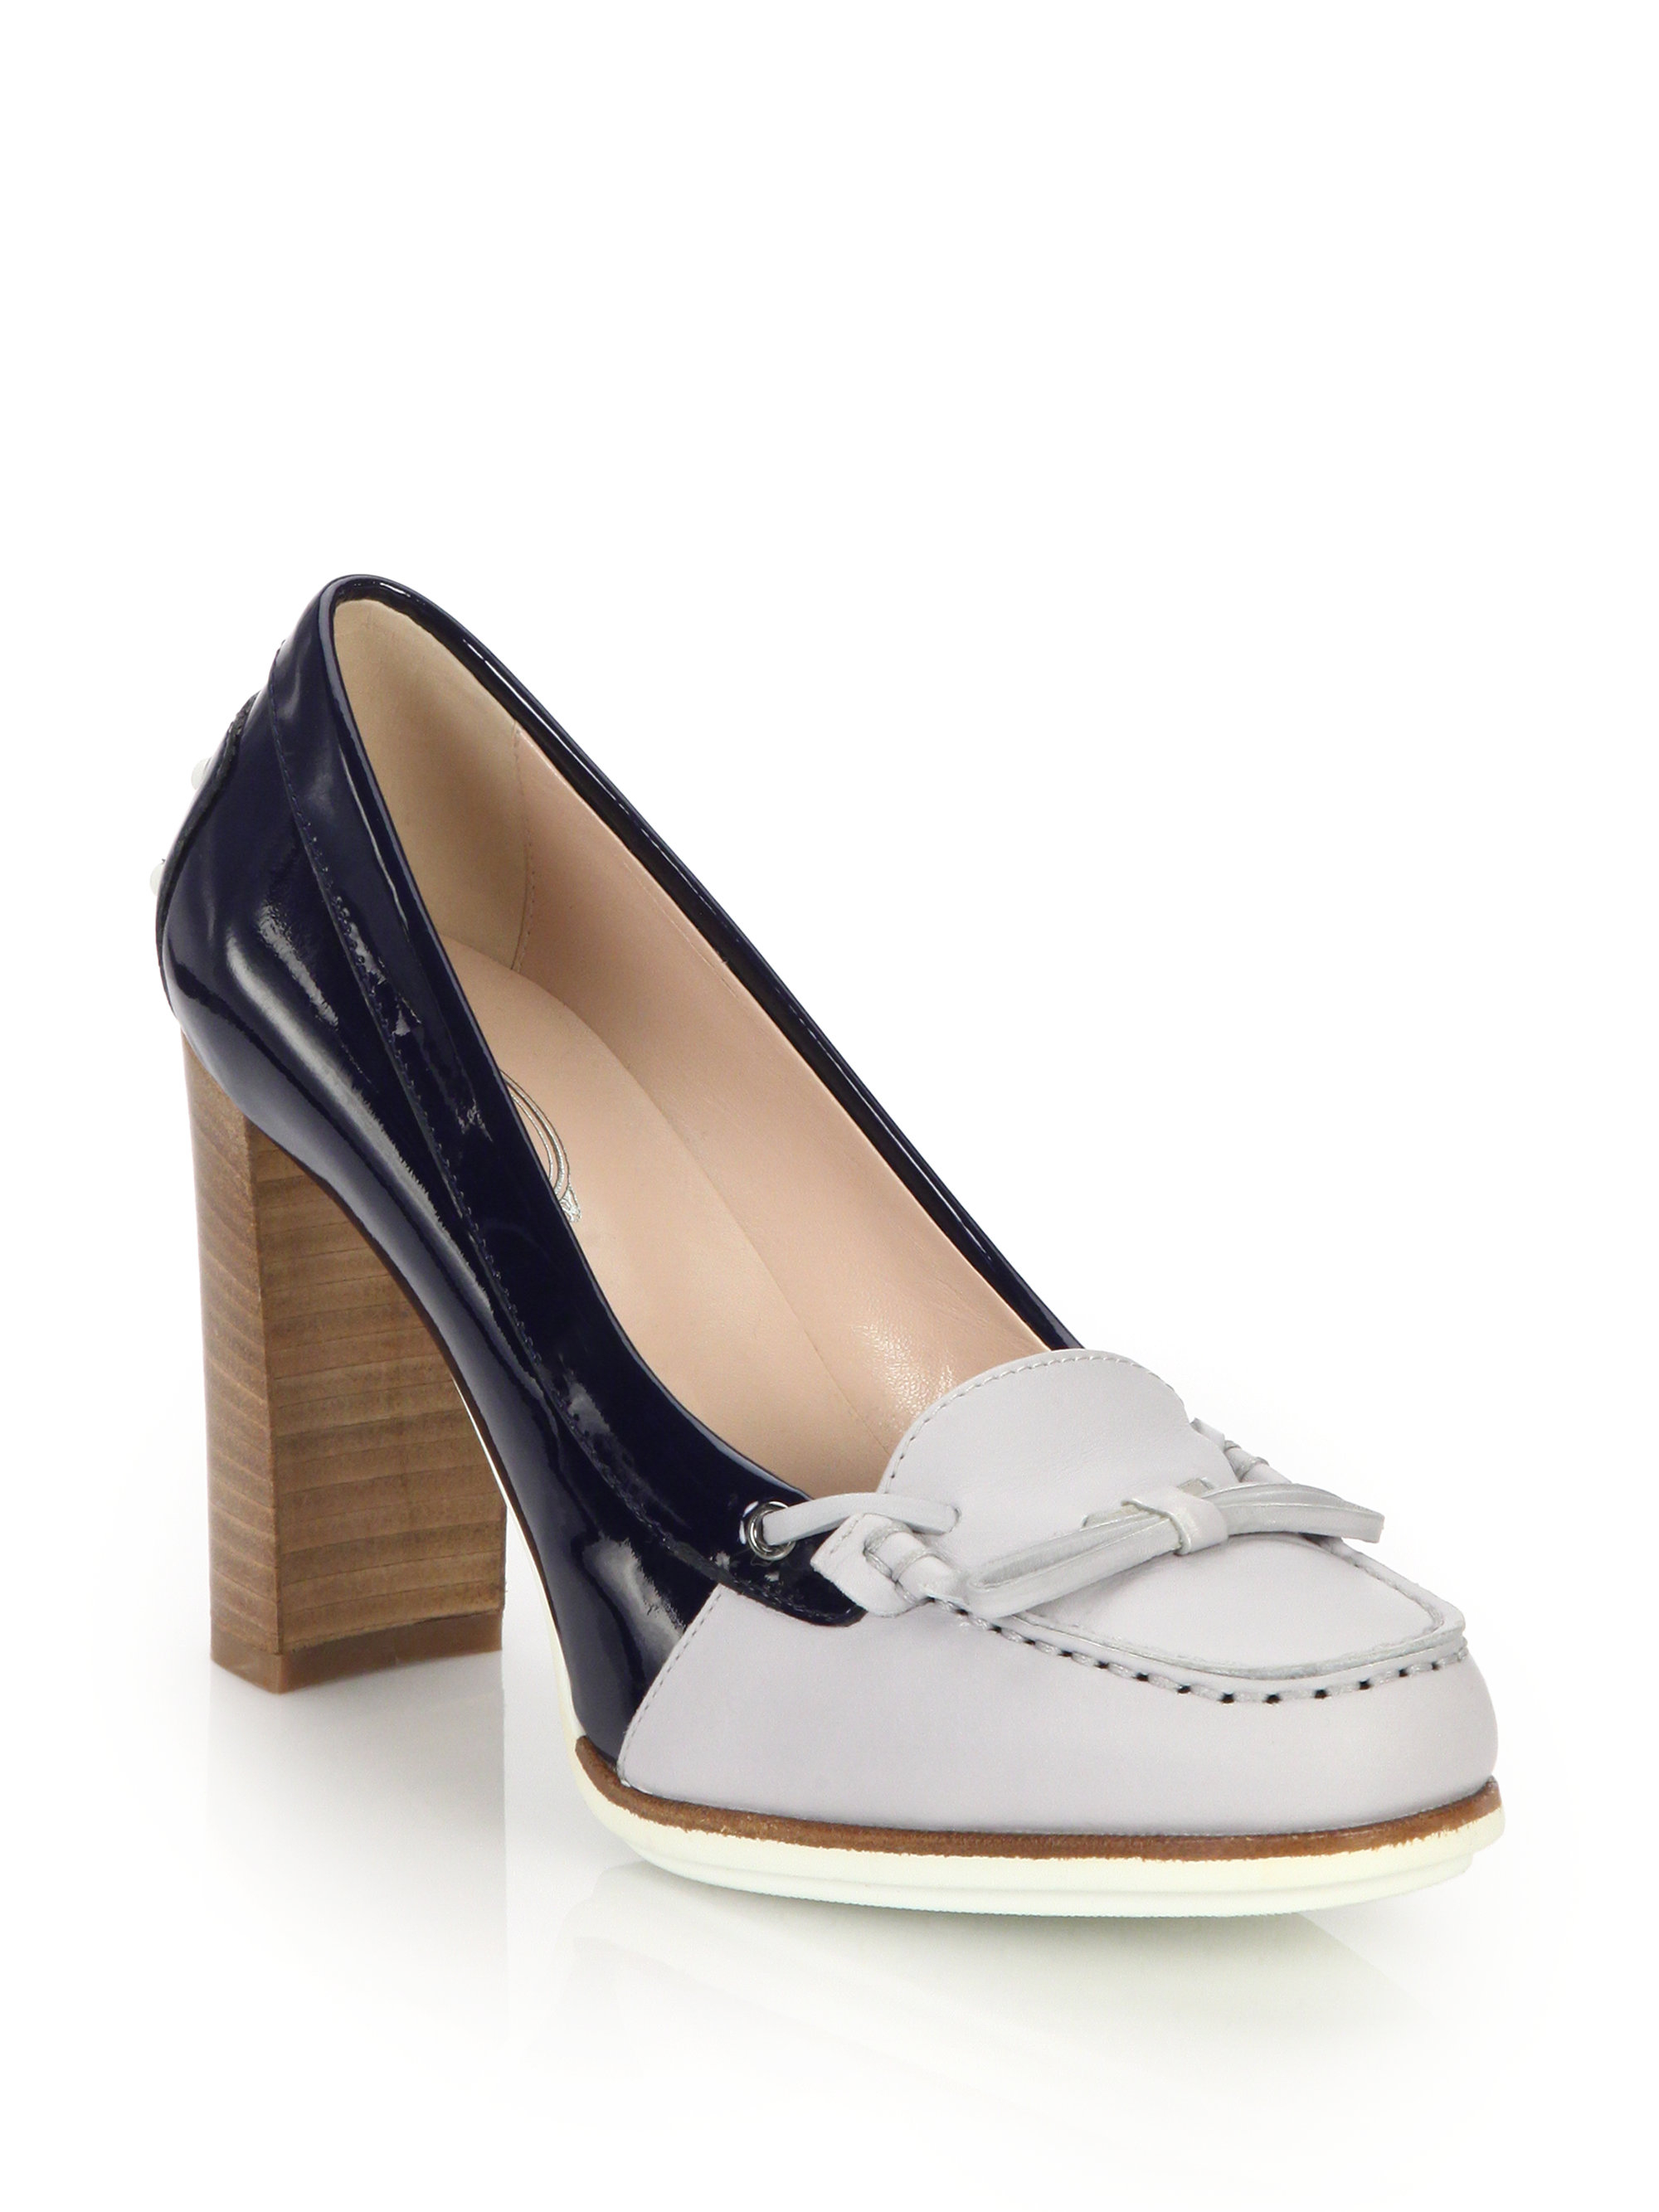 Lyst - Tod'S Two-Tone Leather & Patent Leather Loafer Pumps in Blue